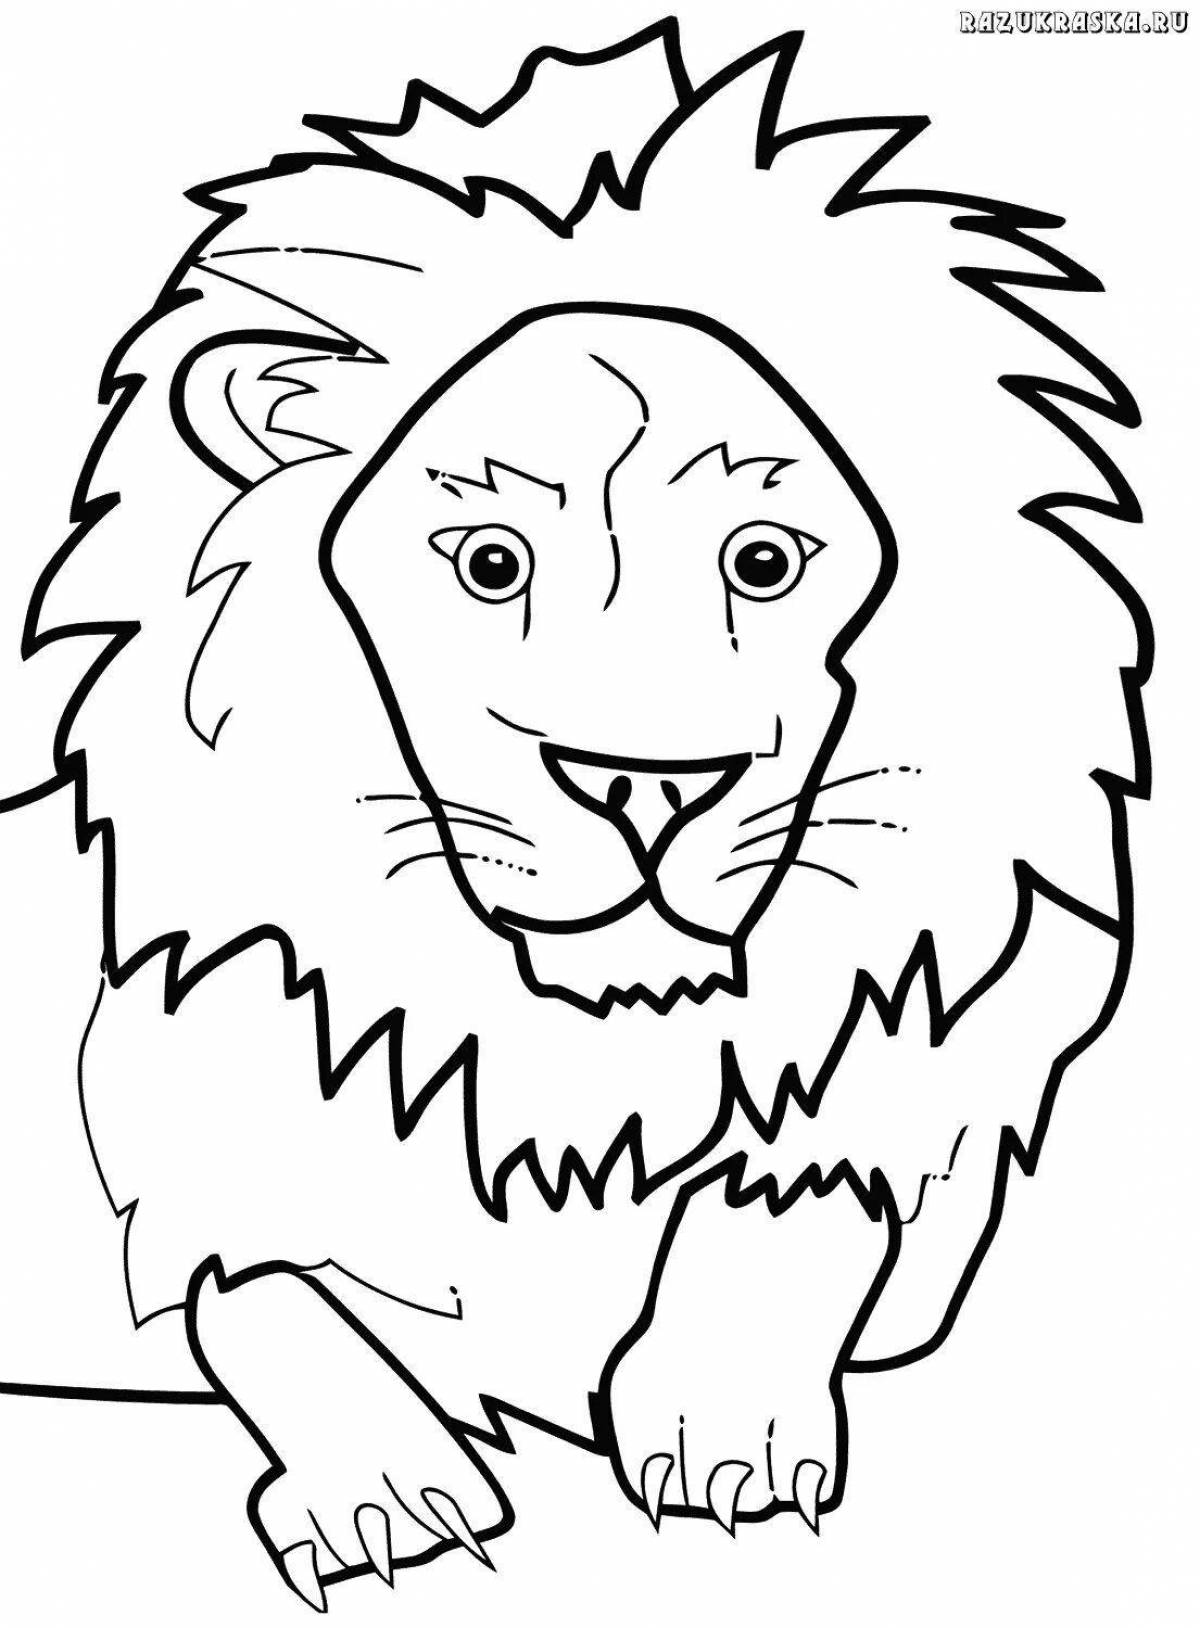 Coloring book funny lion for children 3-4 years old